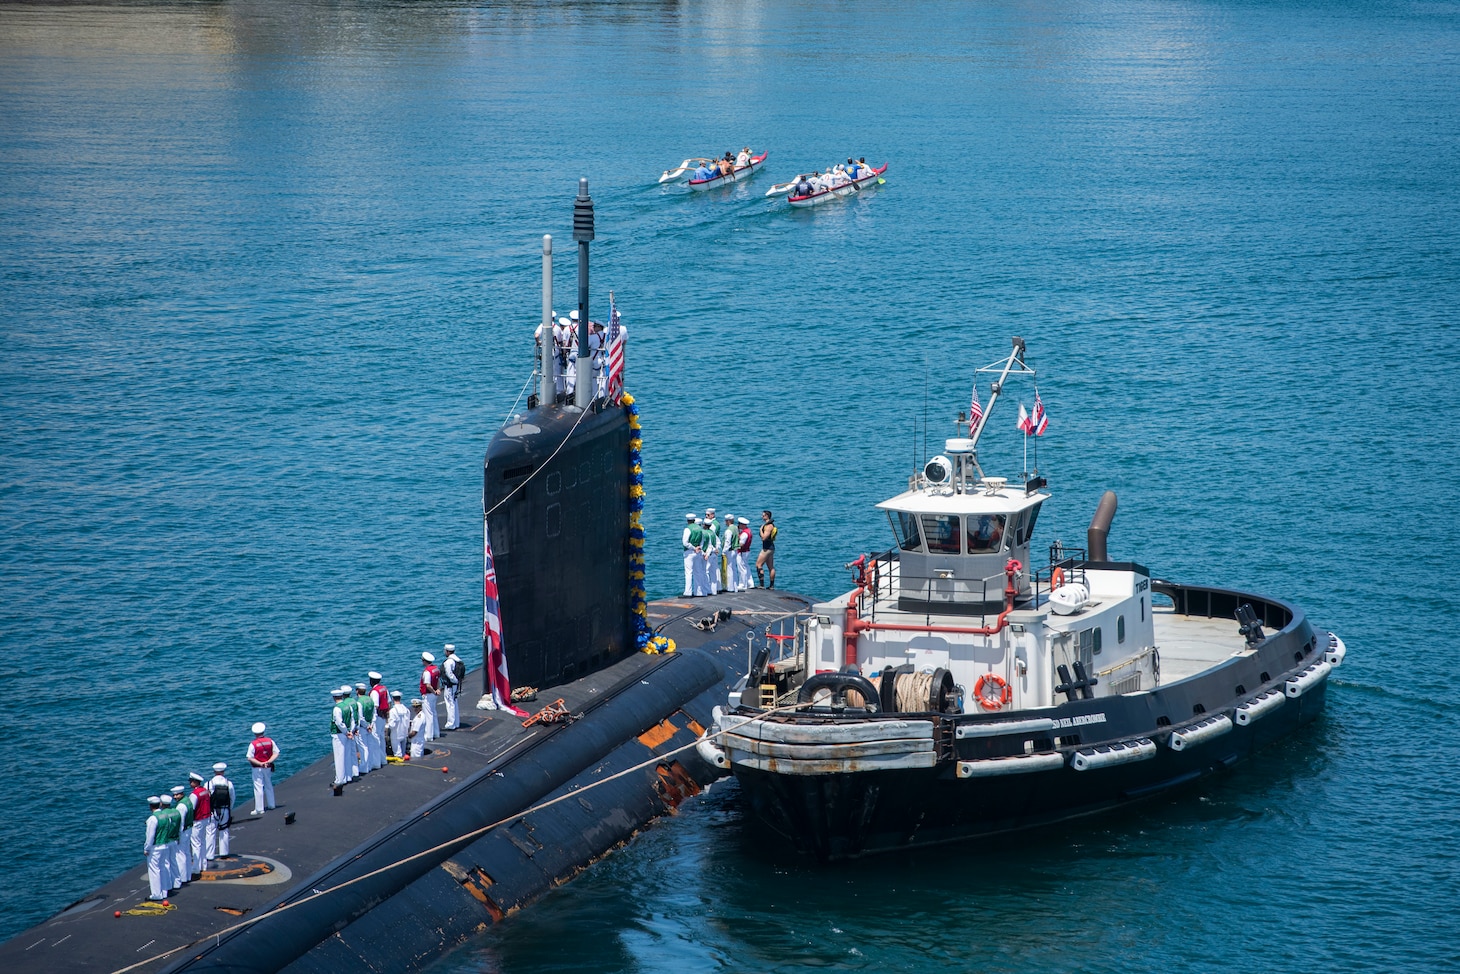 190606-N-SF508-0184 JOINT BASE PEARL HARBOR-HICKAM, Hawaii (June 6, 2019) Members of the Outrigger Canoe Club escort the Virginia-class fast attack submarine USS Hawaii (SSN 776) as it arrives at Joint Base Pearl Harbor-Hickam, after completing its latest deployment, June 6. (U.S. Navy Photo by Mass Communication Specialist 2nd Class Charles Oki/Released)